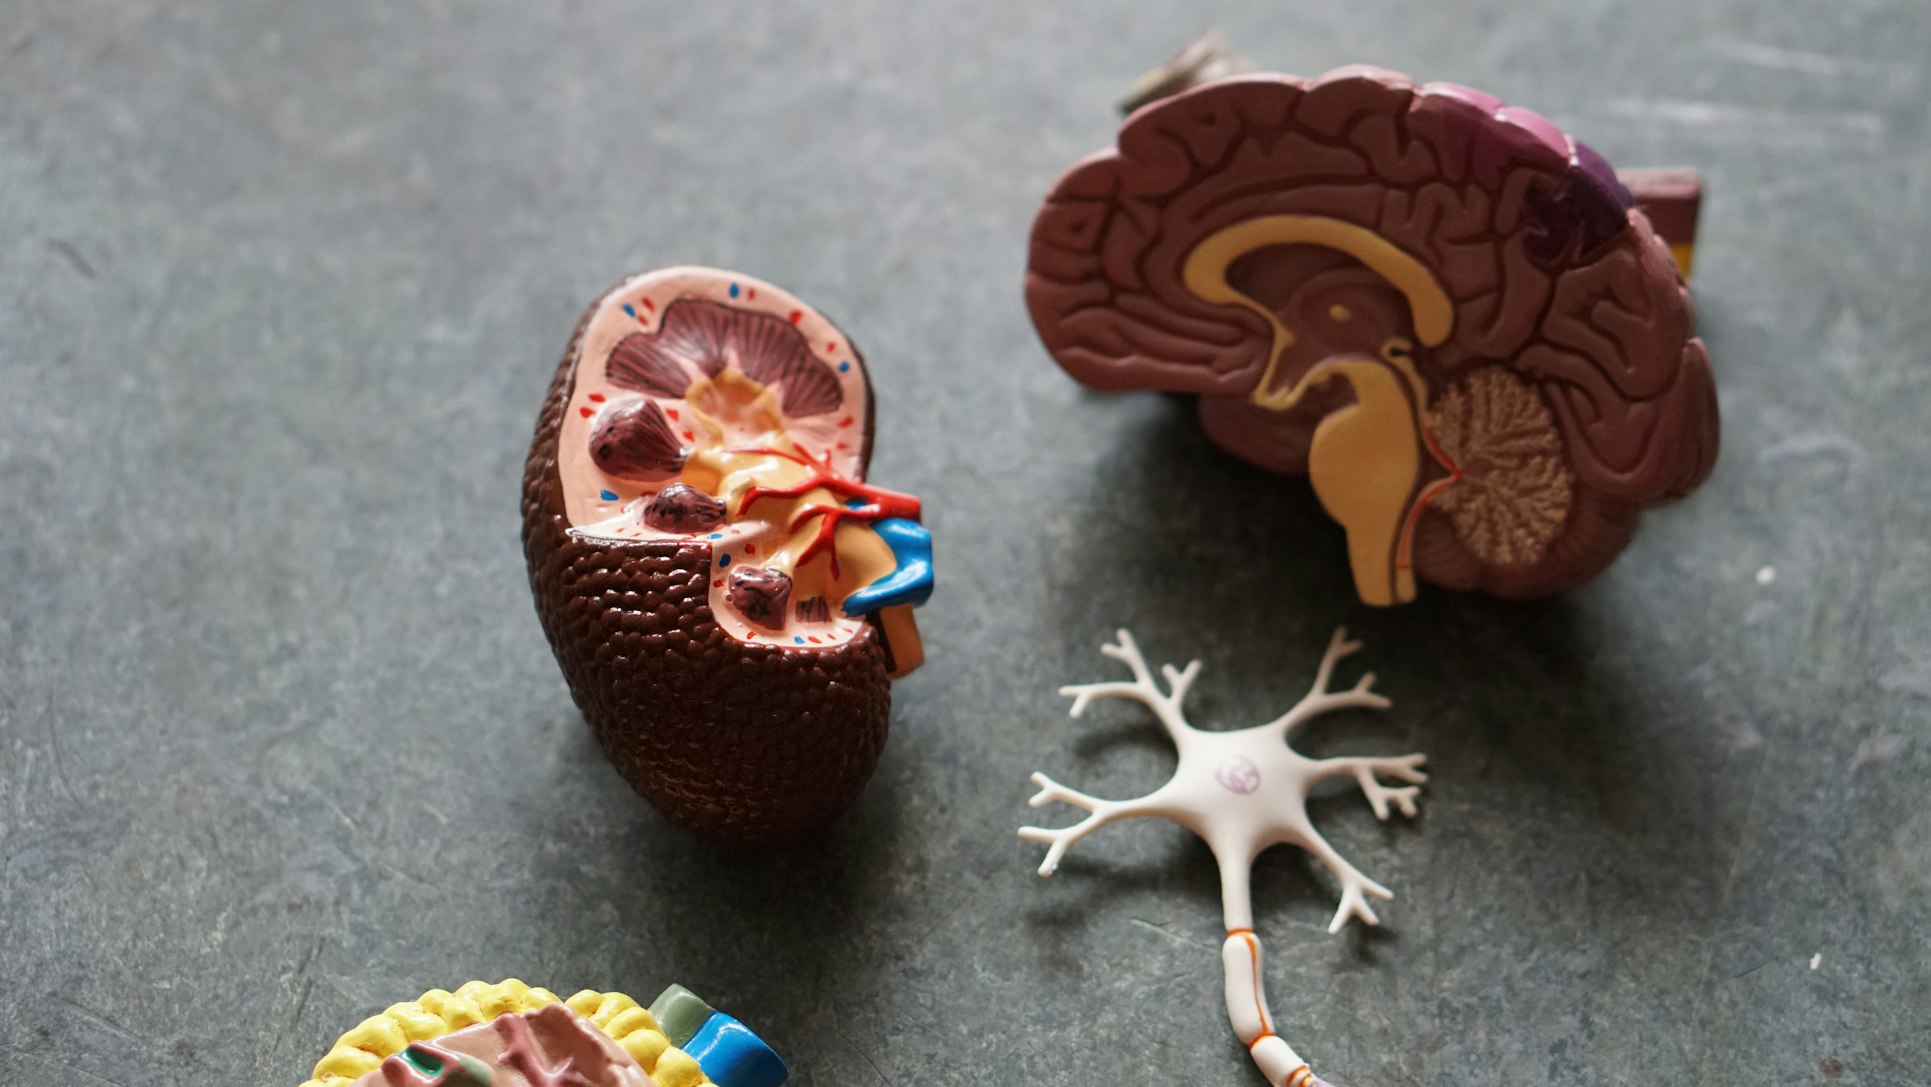 A Kidney Model, among other organs.